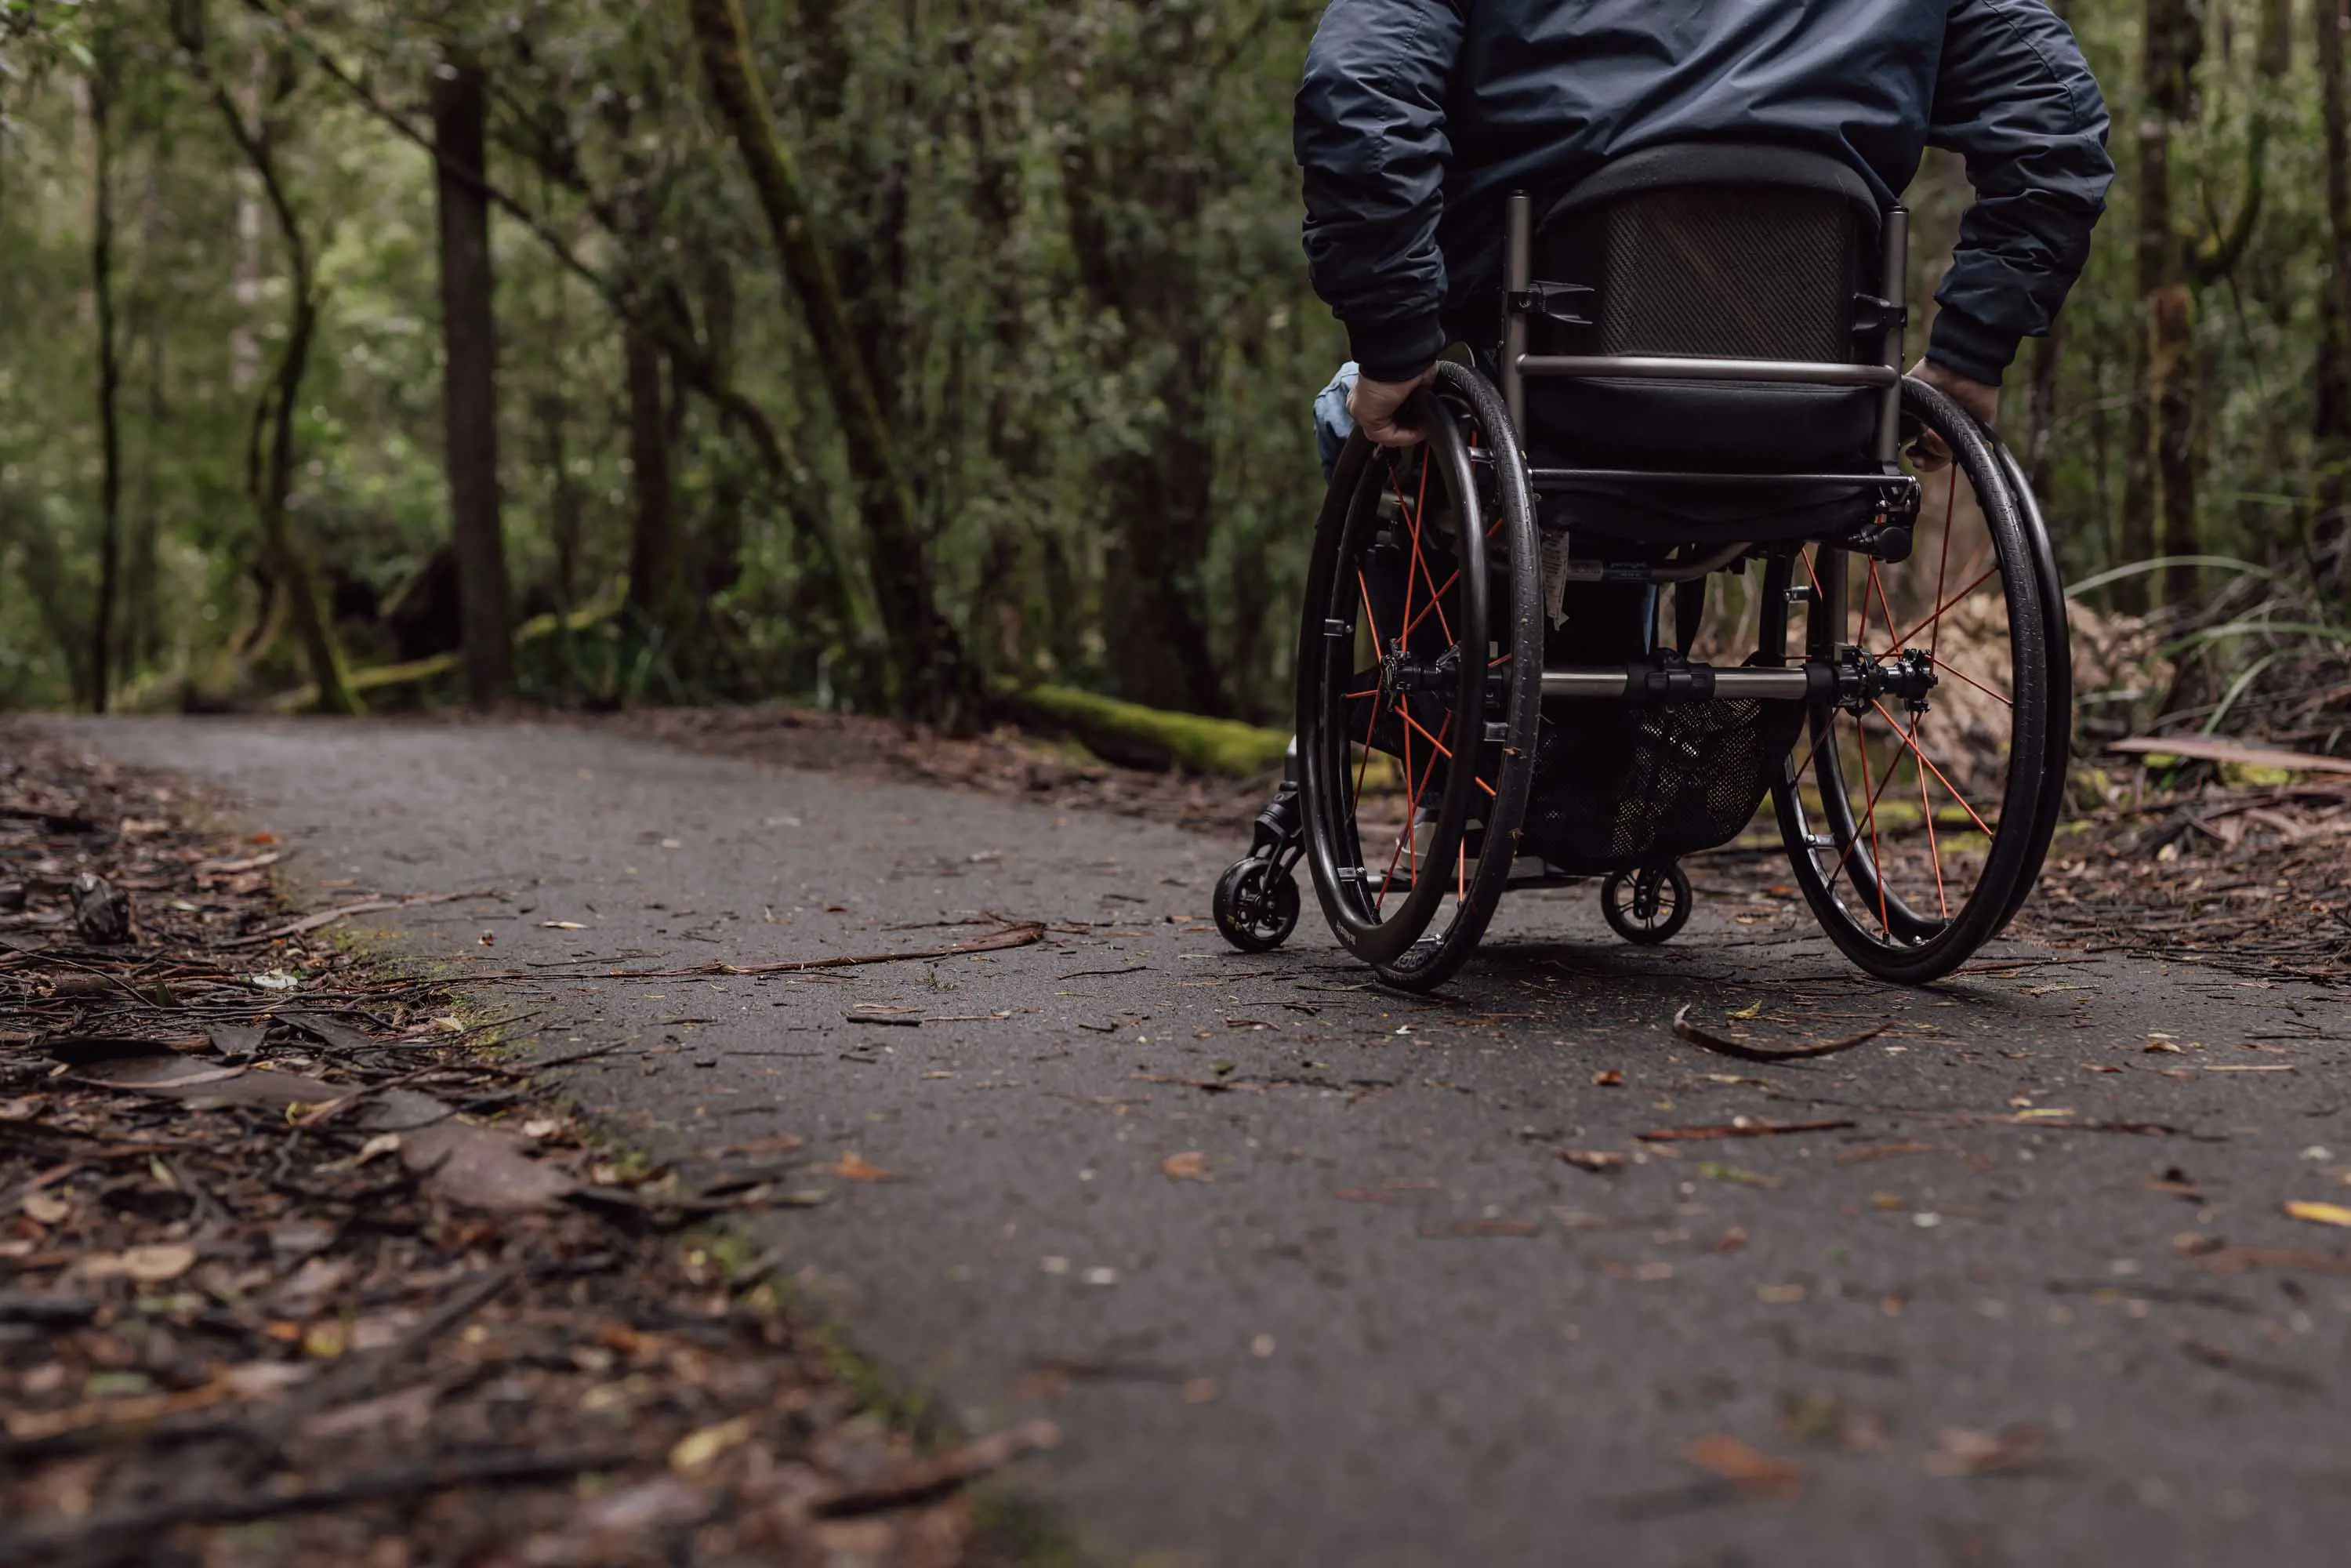 A person in a wheelchair rolls along a sealed pathway within a forest.